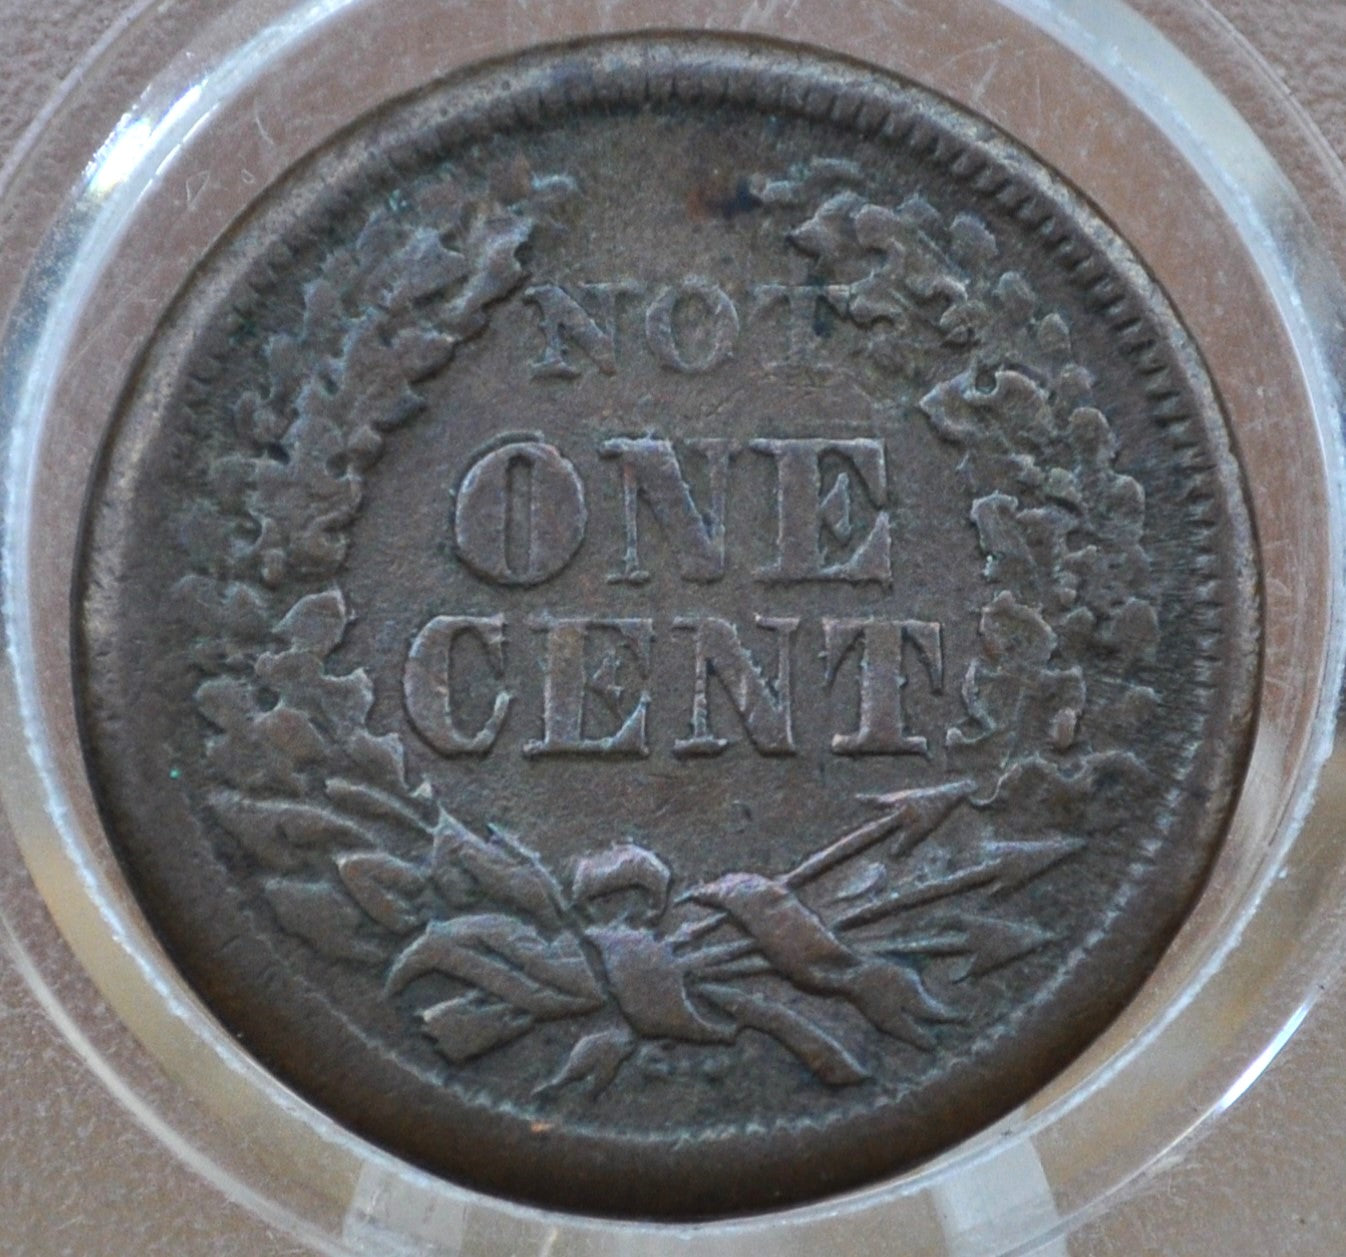 1863 Civil War Token - XF (Extremely Fine) - Not One Cent - Great Design, Great Condition